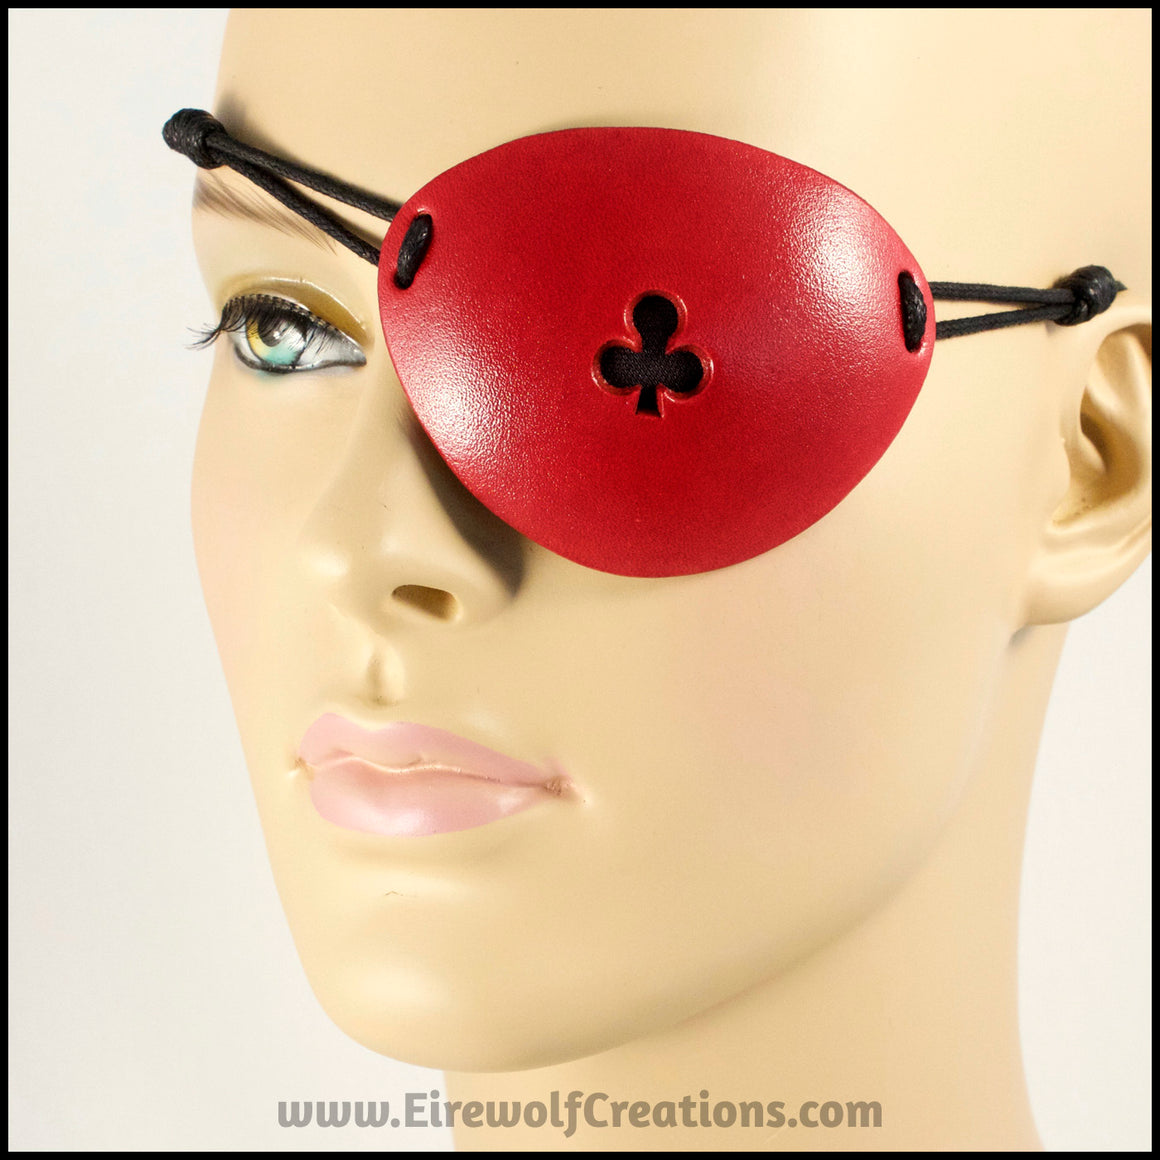 See-through Playing Card Eye Patches, red leather heart, diamond, club, or spade handmade masquerade, magician, larp, Halloween, or pirate cosplay costume